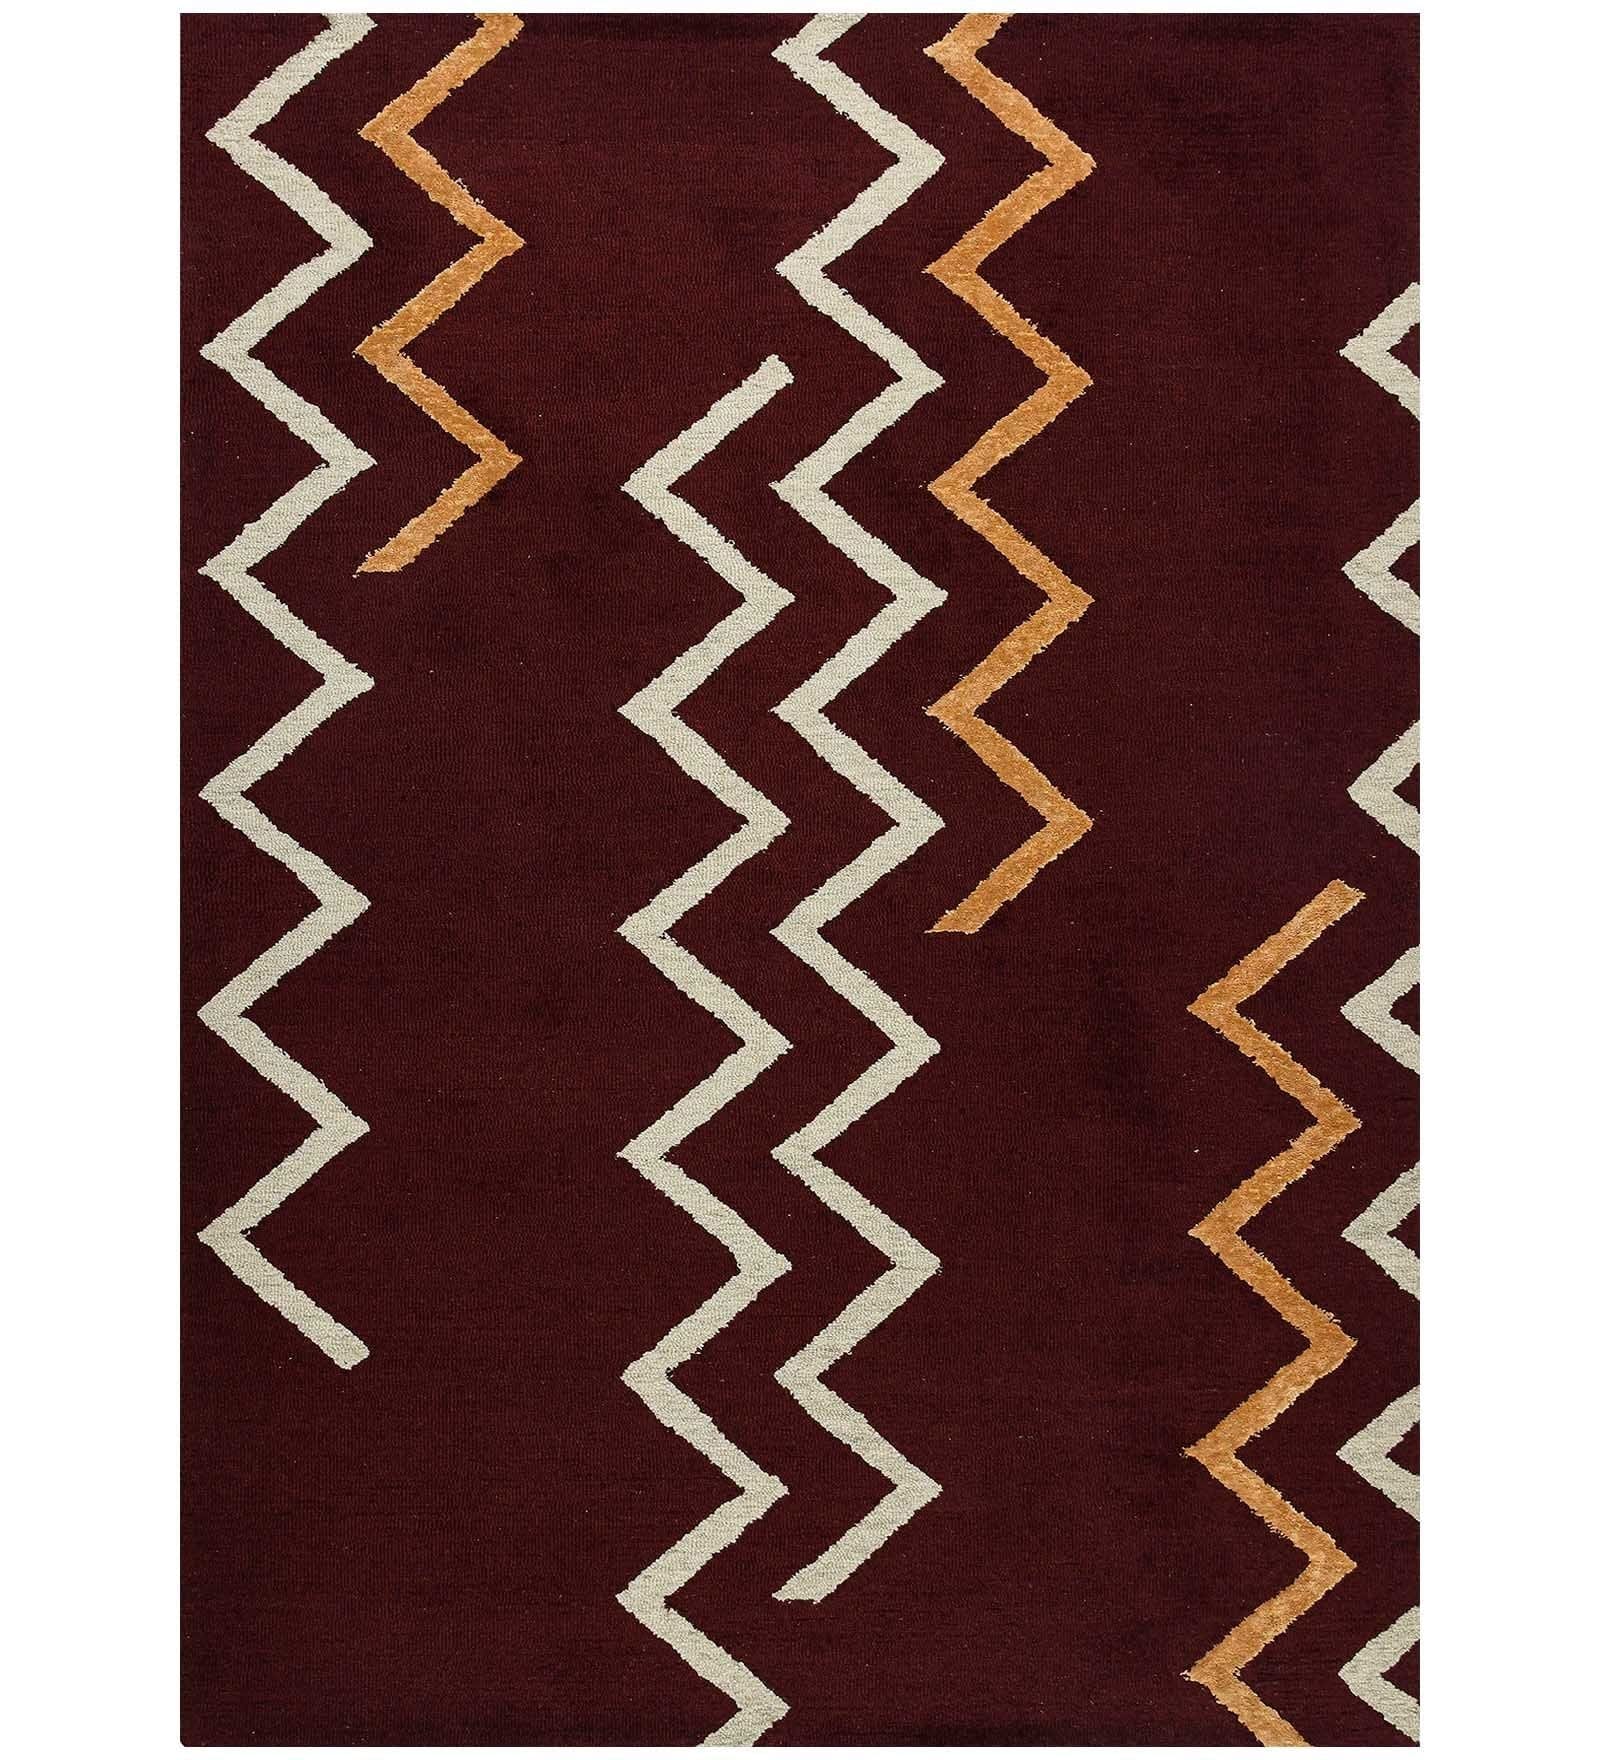 RED BERRY Wool & Viscose Canyan 8x10 Feet  Hand-Tufted Carpet - Rug